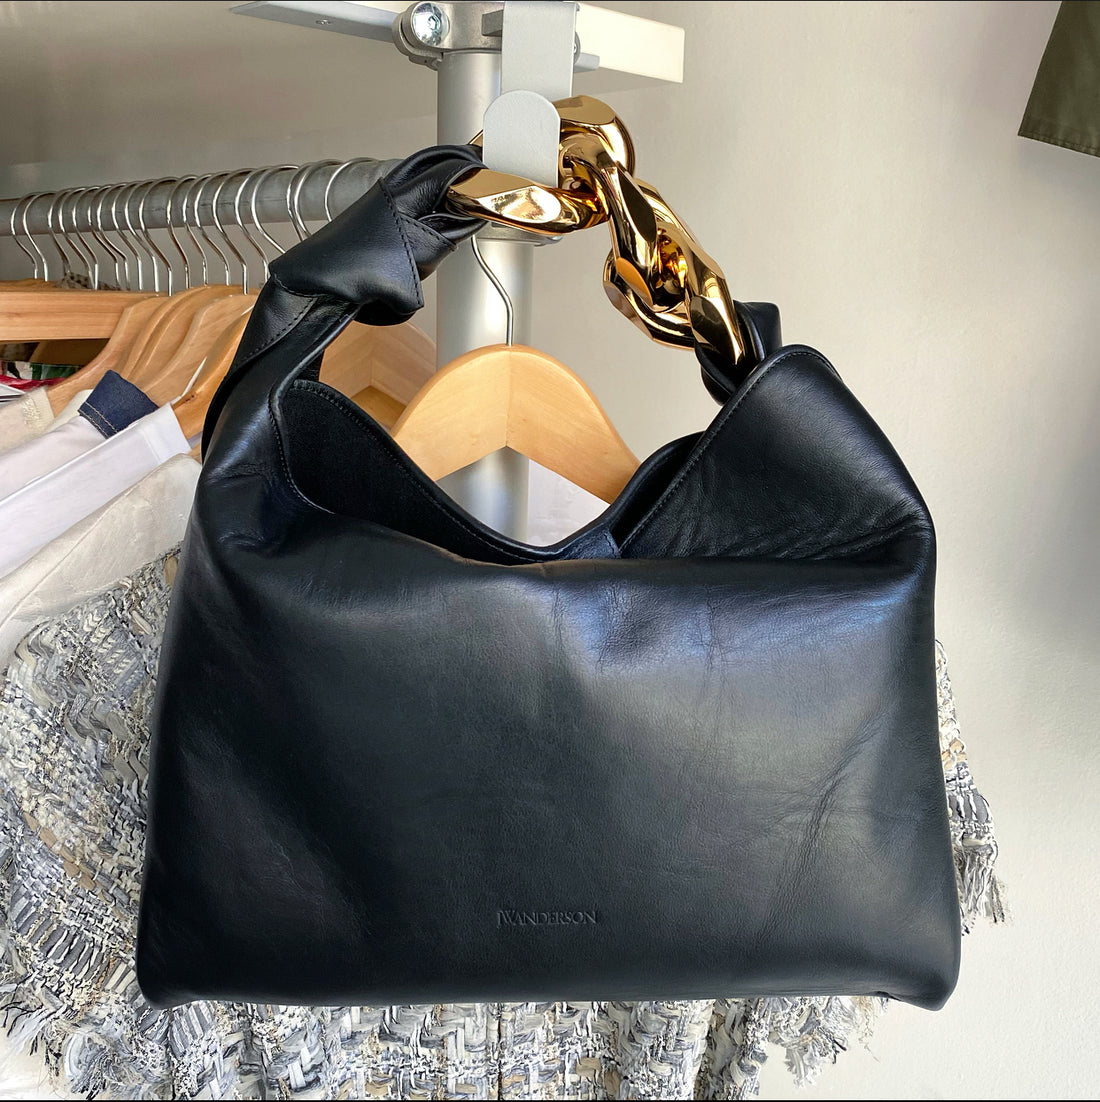 JW Anderson Small Chain Hobo Bag in Black – Hampden Clothing